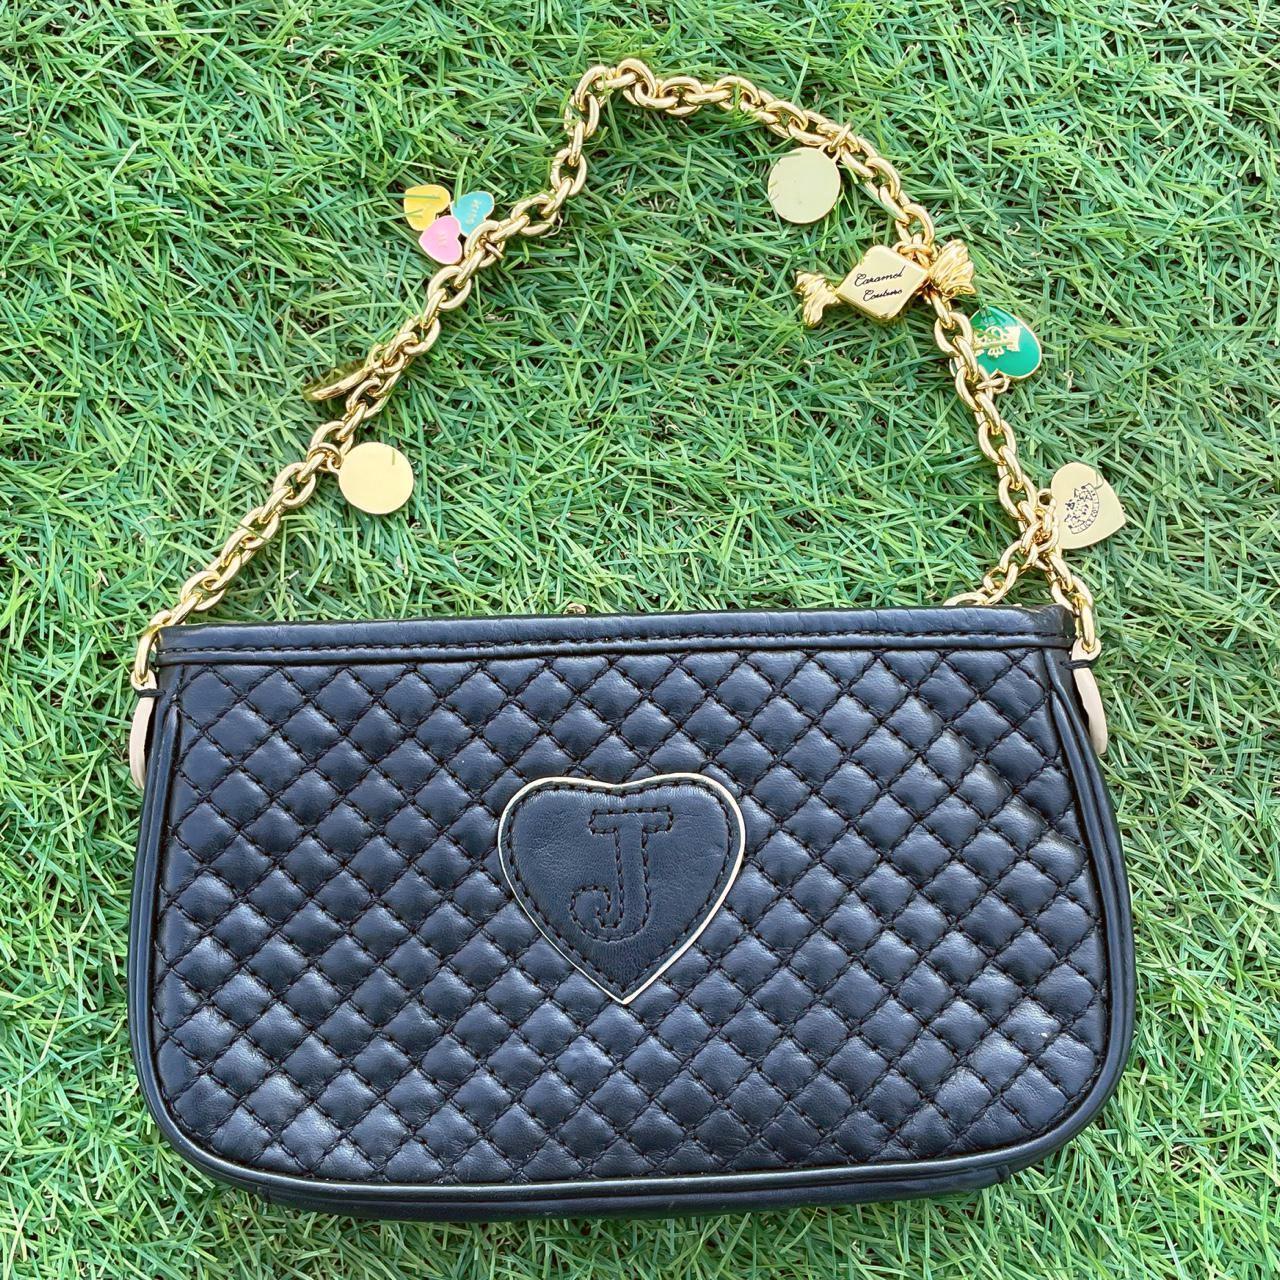 Juicy Couture Women's Black and Gold Bag (2)